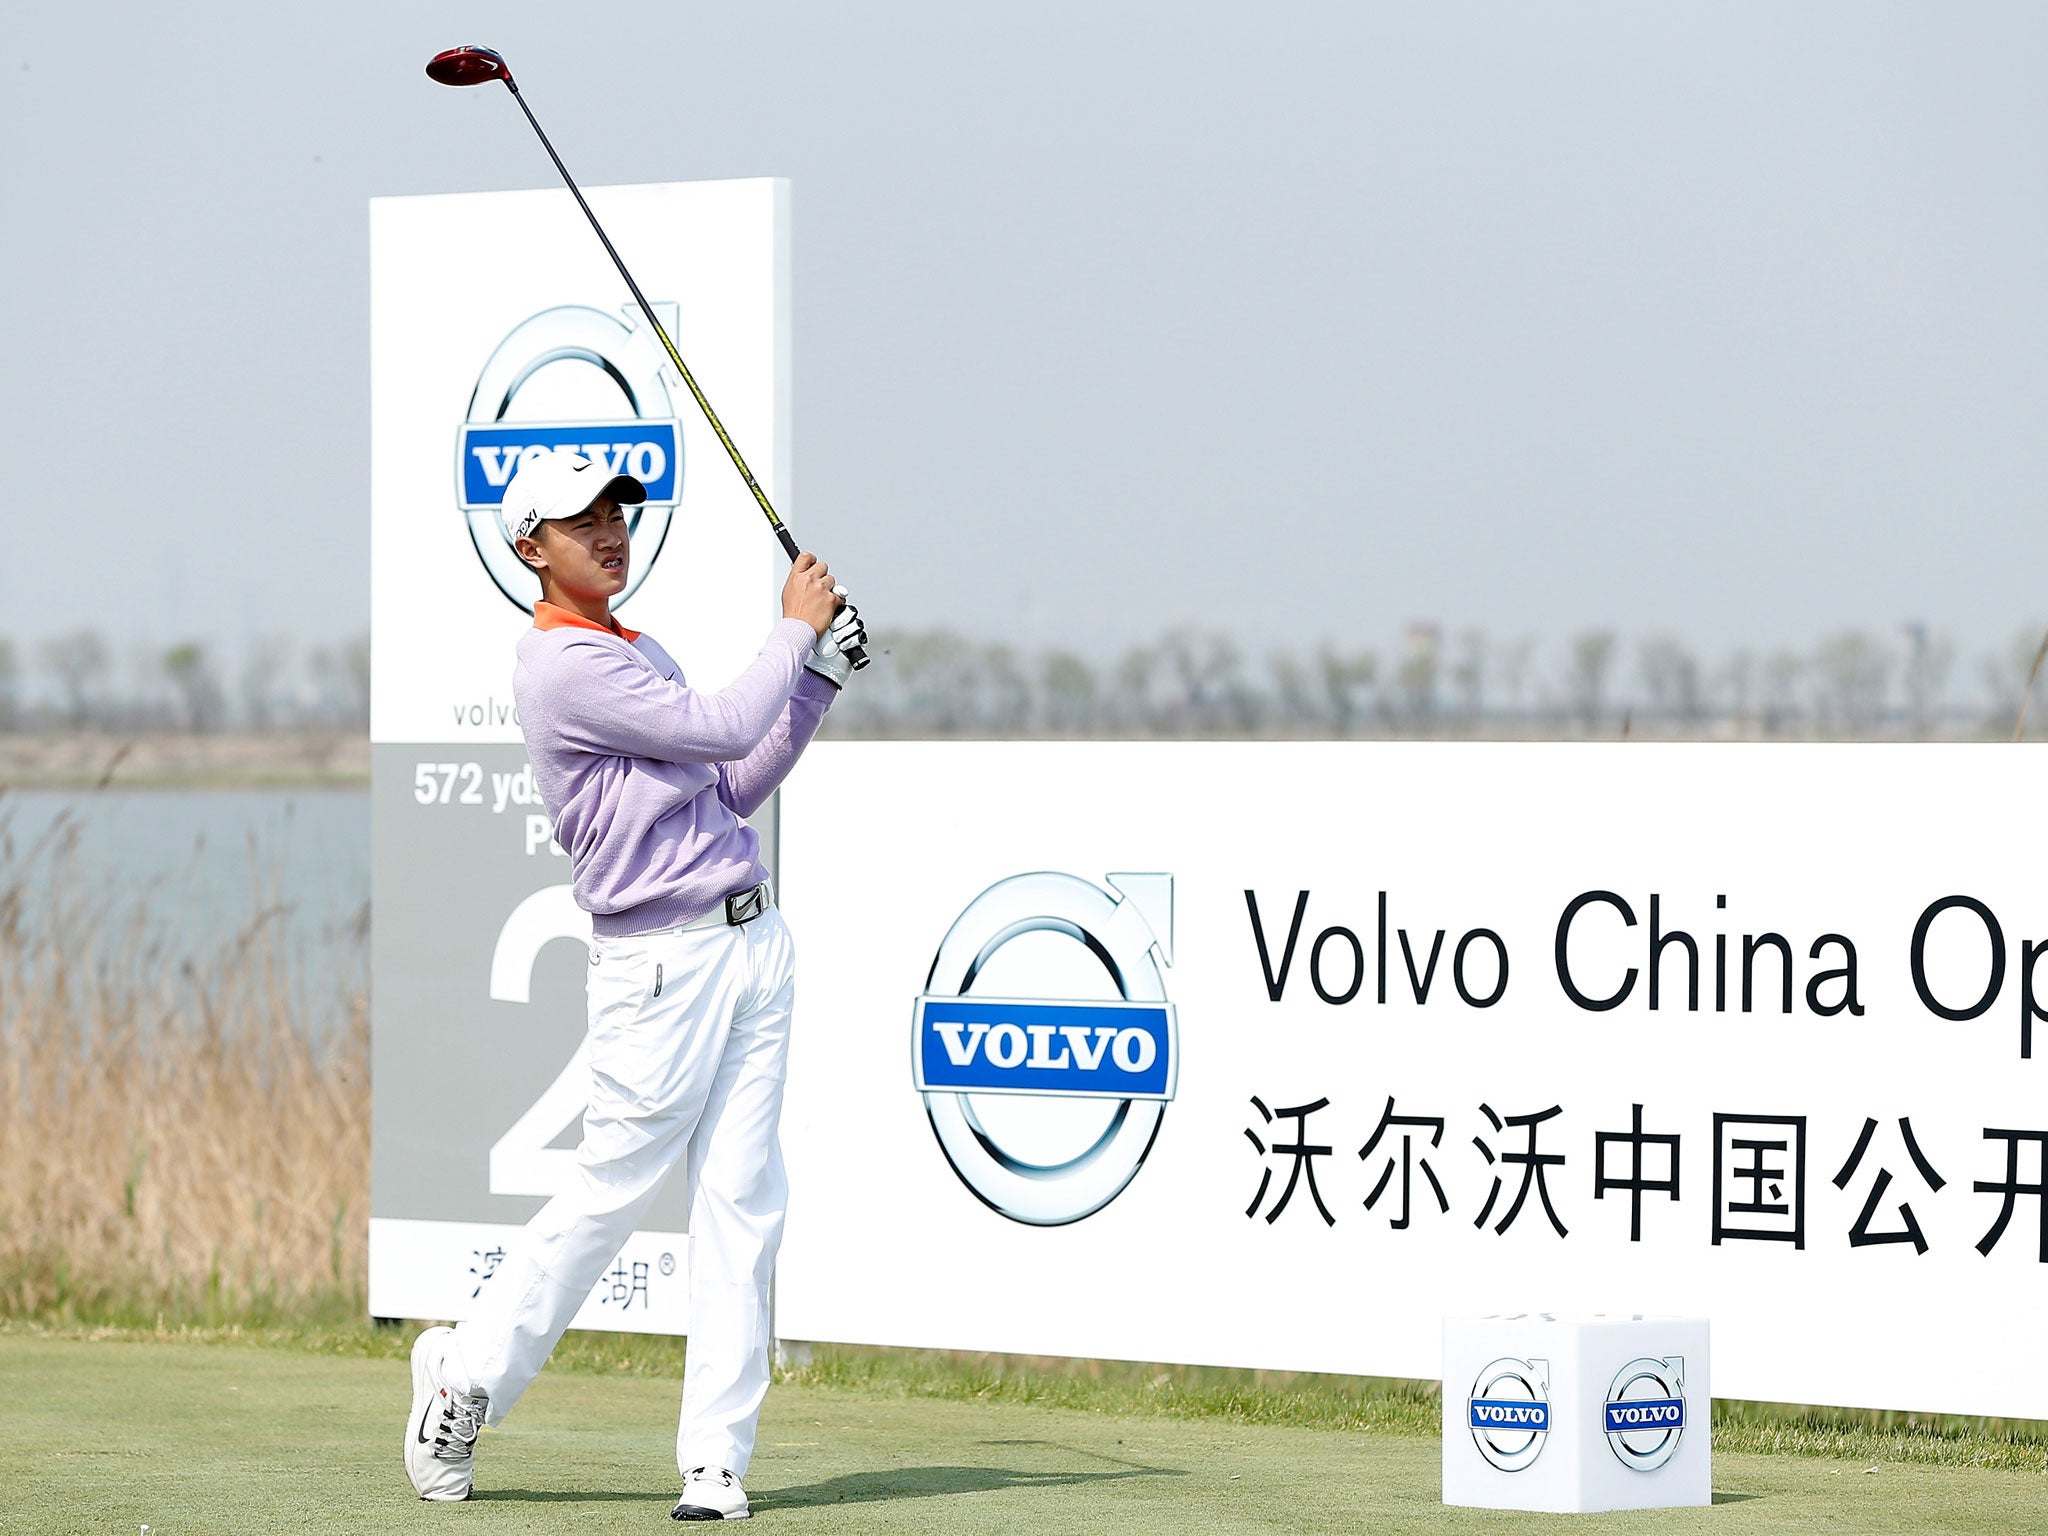 Struggle: Ye Wo-cheng became the youngest player in European Tour history